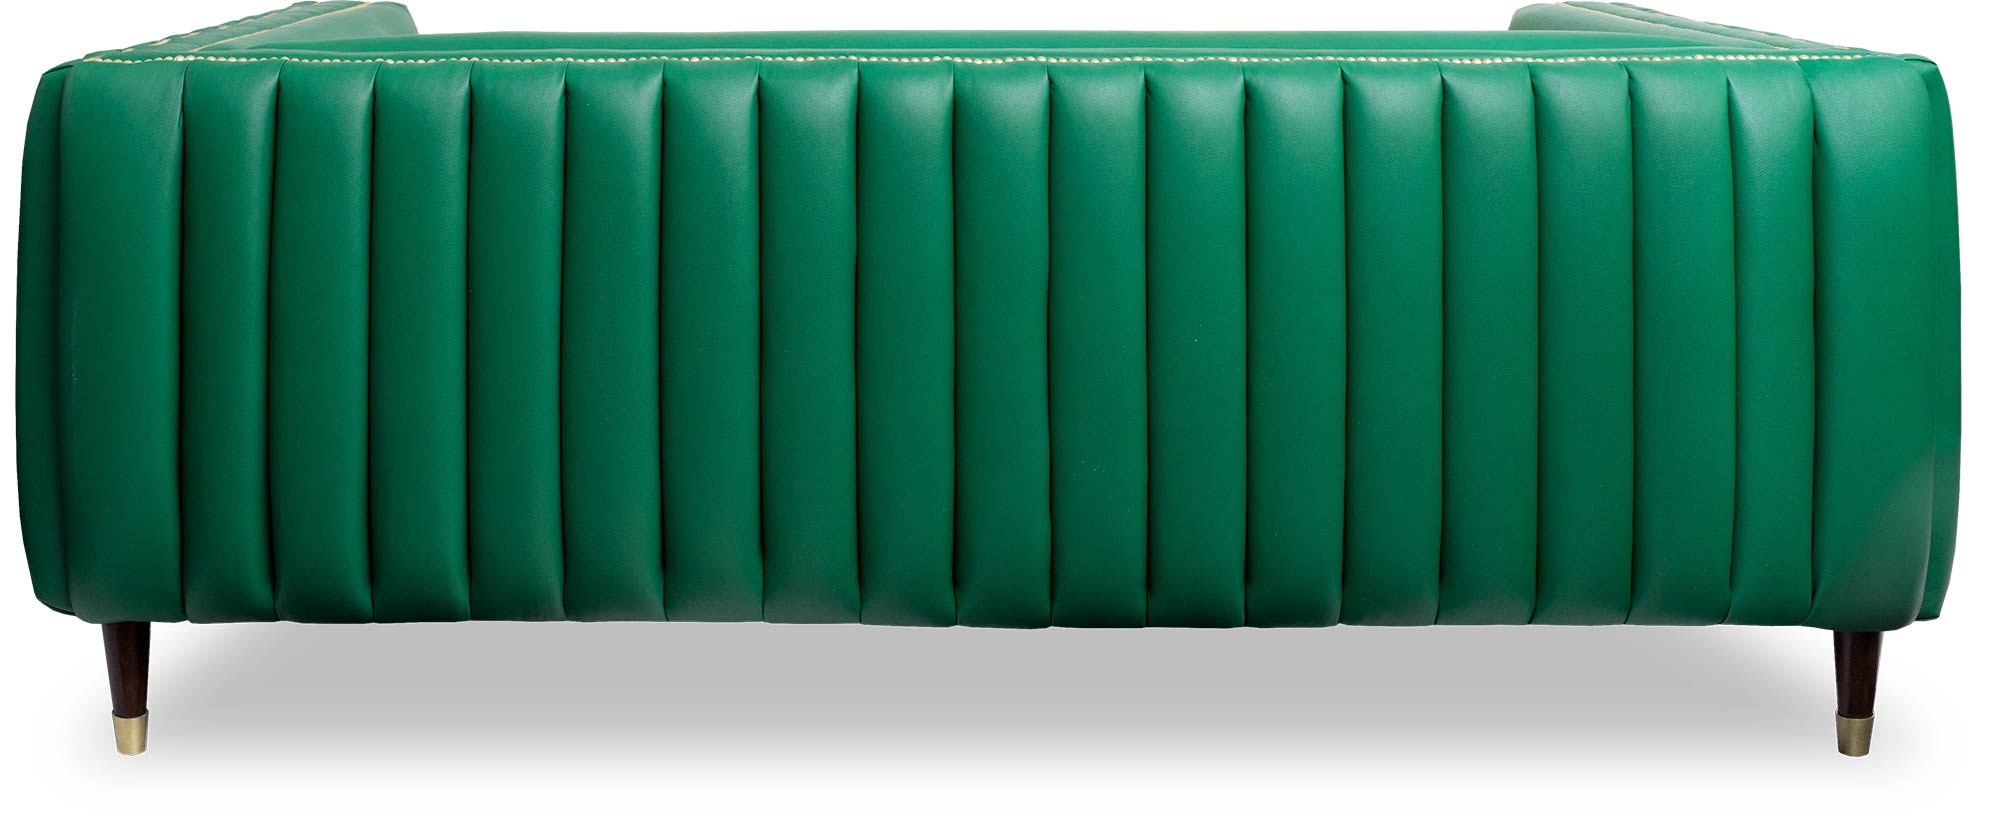 79 Electra sofa in Brisa Original Esmerelda green faux-leather with bench cushion and brass-capped legs